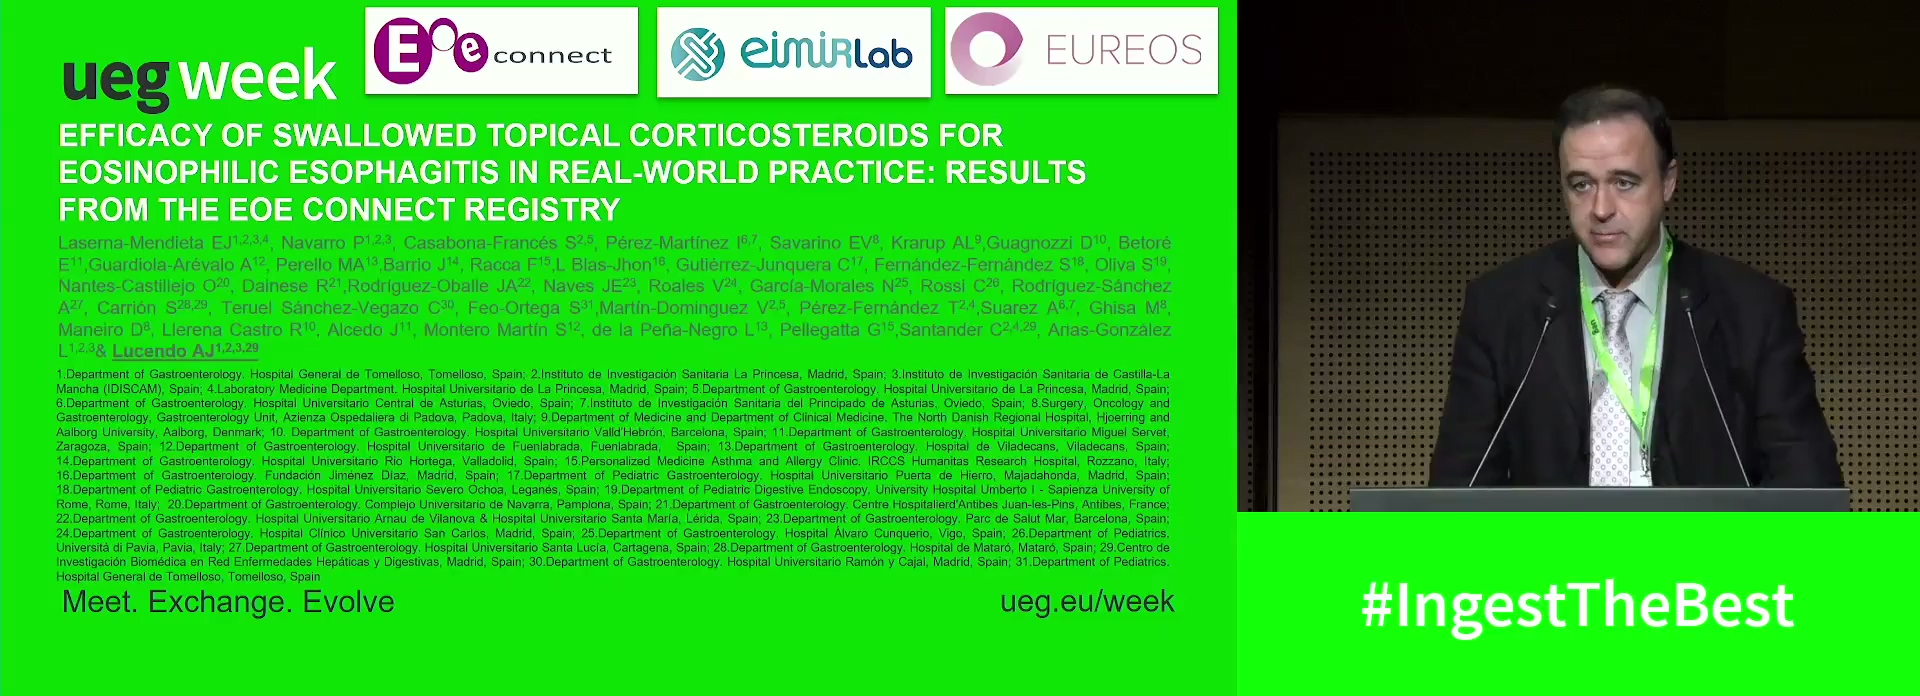 EFFICACY OF SWALLOWED TOPICAL CORTICOSTEROIDS FOR EOSINOPHILIC ESOPHAGITIS IN REAL-WORLD PRACTICE: RESULTS FROM THE EOE CONNECT REGISTRY